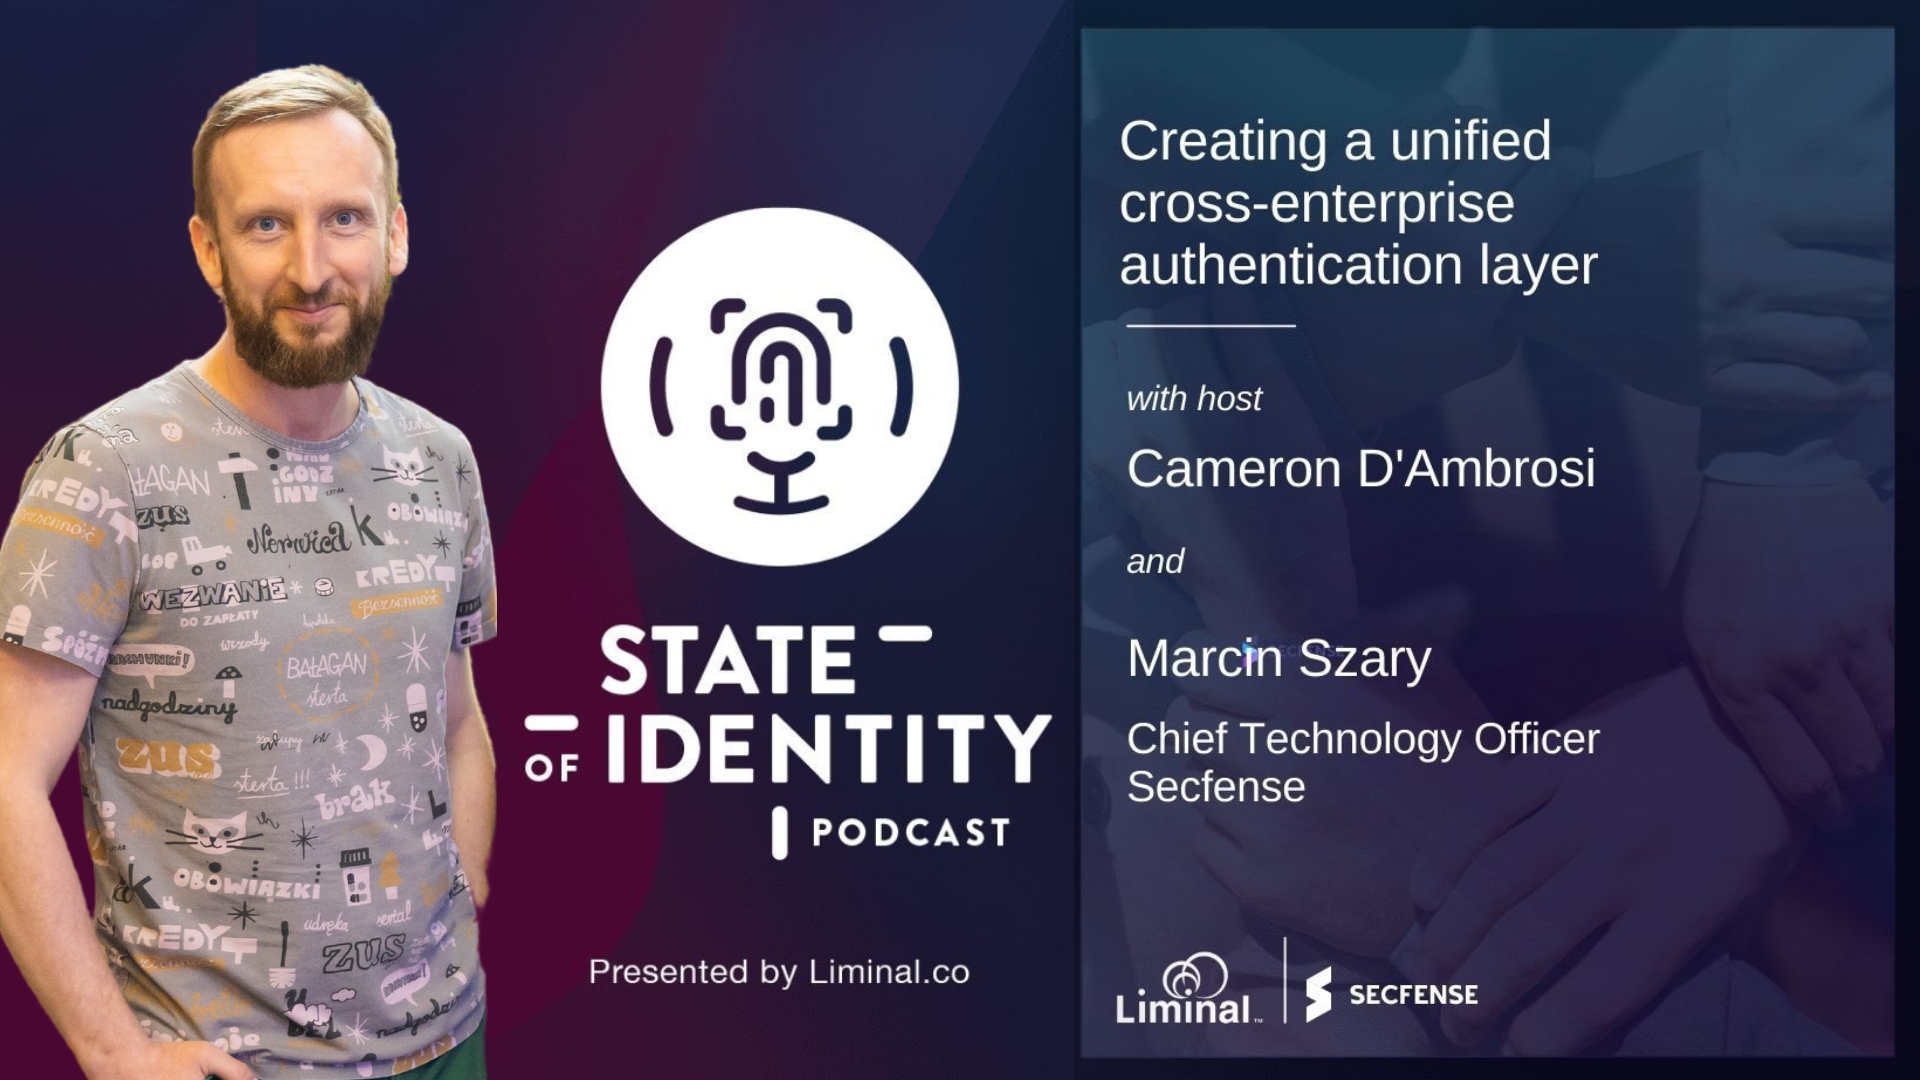 Marcin Szary at State of Identity Podcast